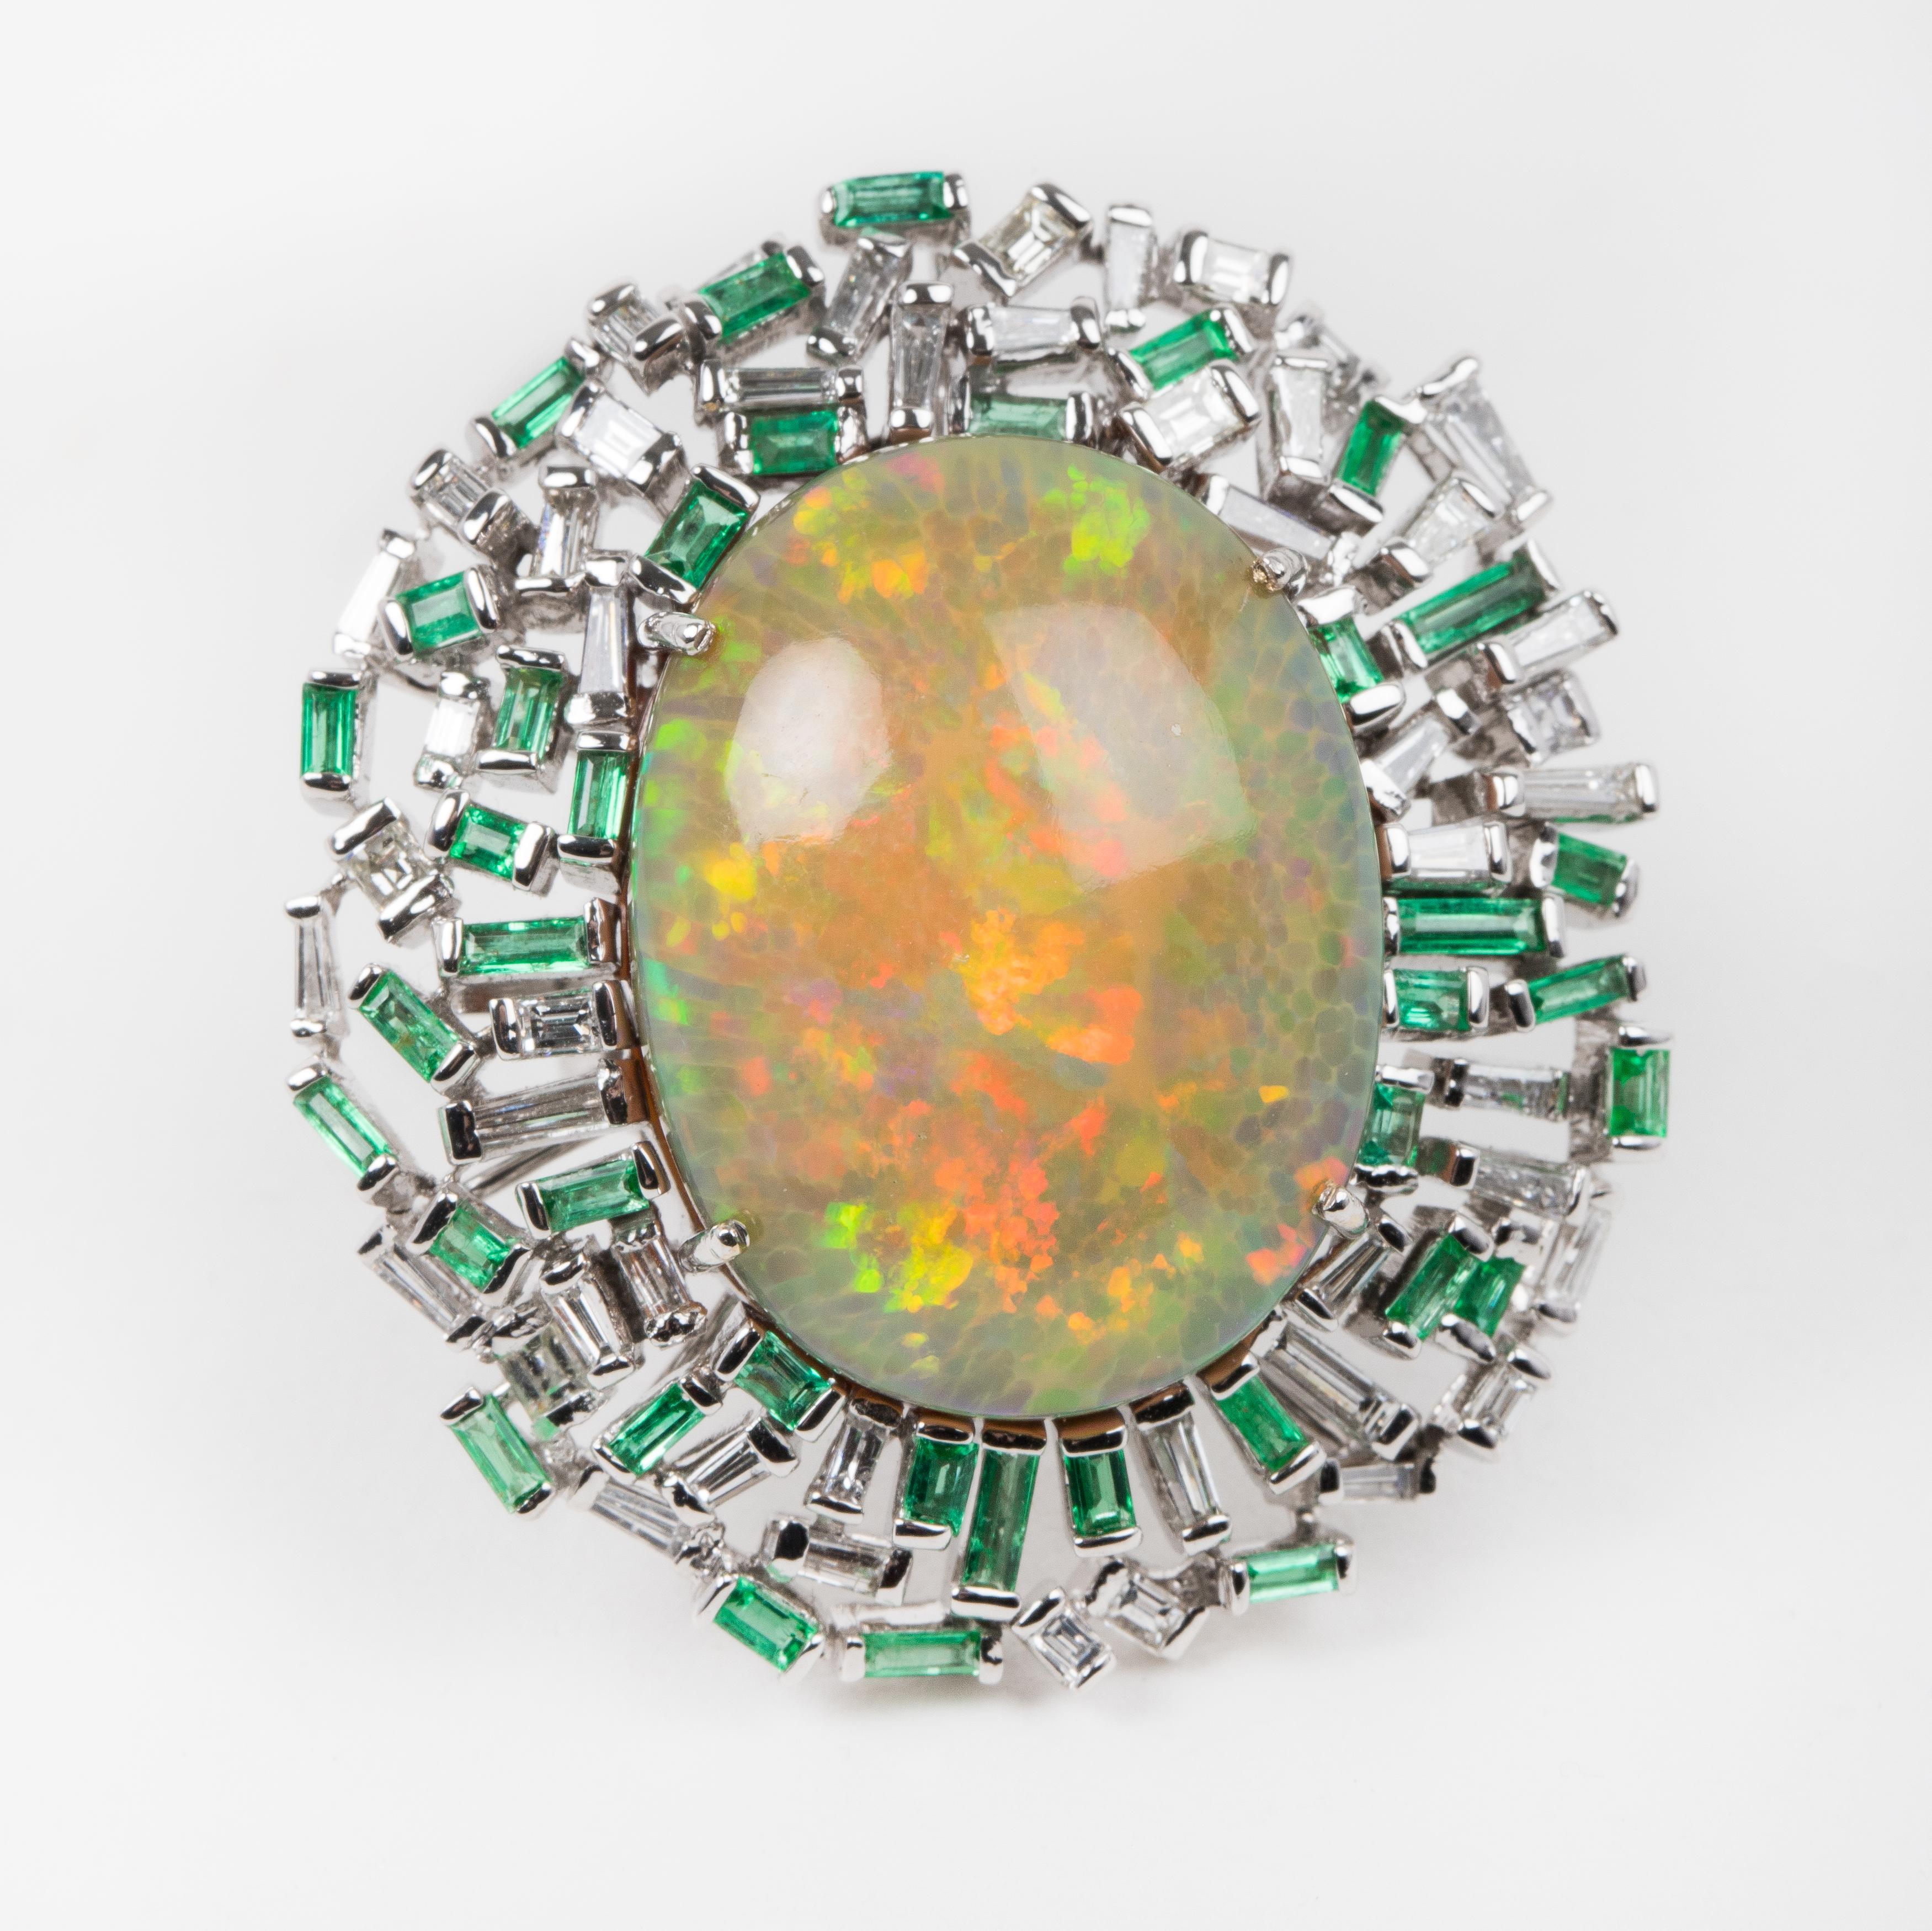 This unique ring features an amazing rainbow color opal stone set with baguette-cut emeralds and diamonds. This ring is a statement piece with gorgeous coloring. It's hard to capture the true color and luster of the opal.

Opal origin -